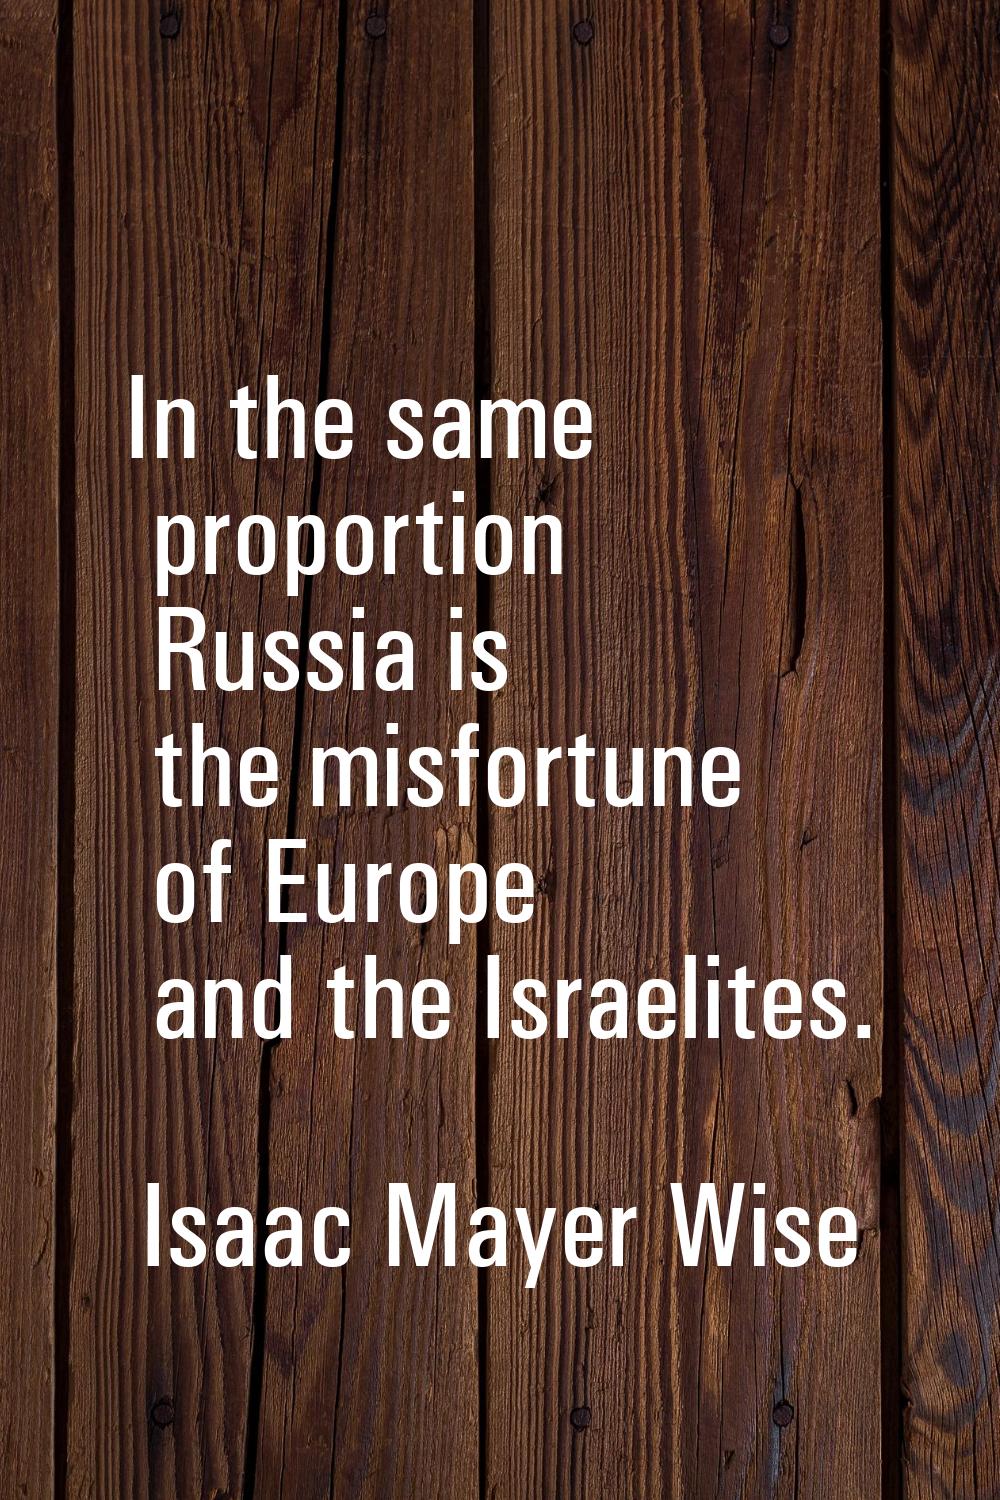 In the same proportion Russia is the misfortune of Europe and the Israelites.